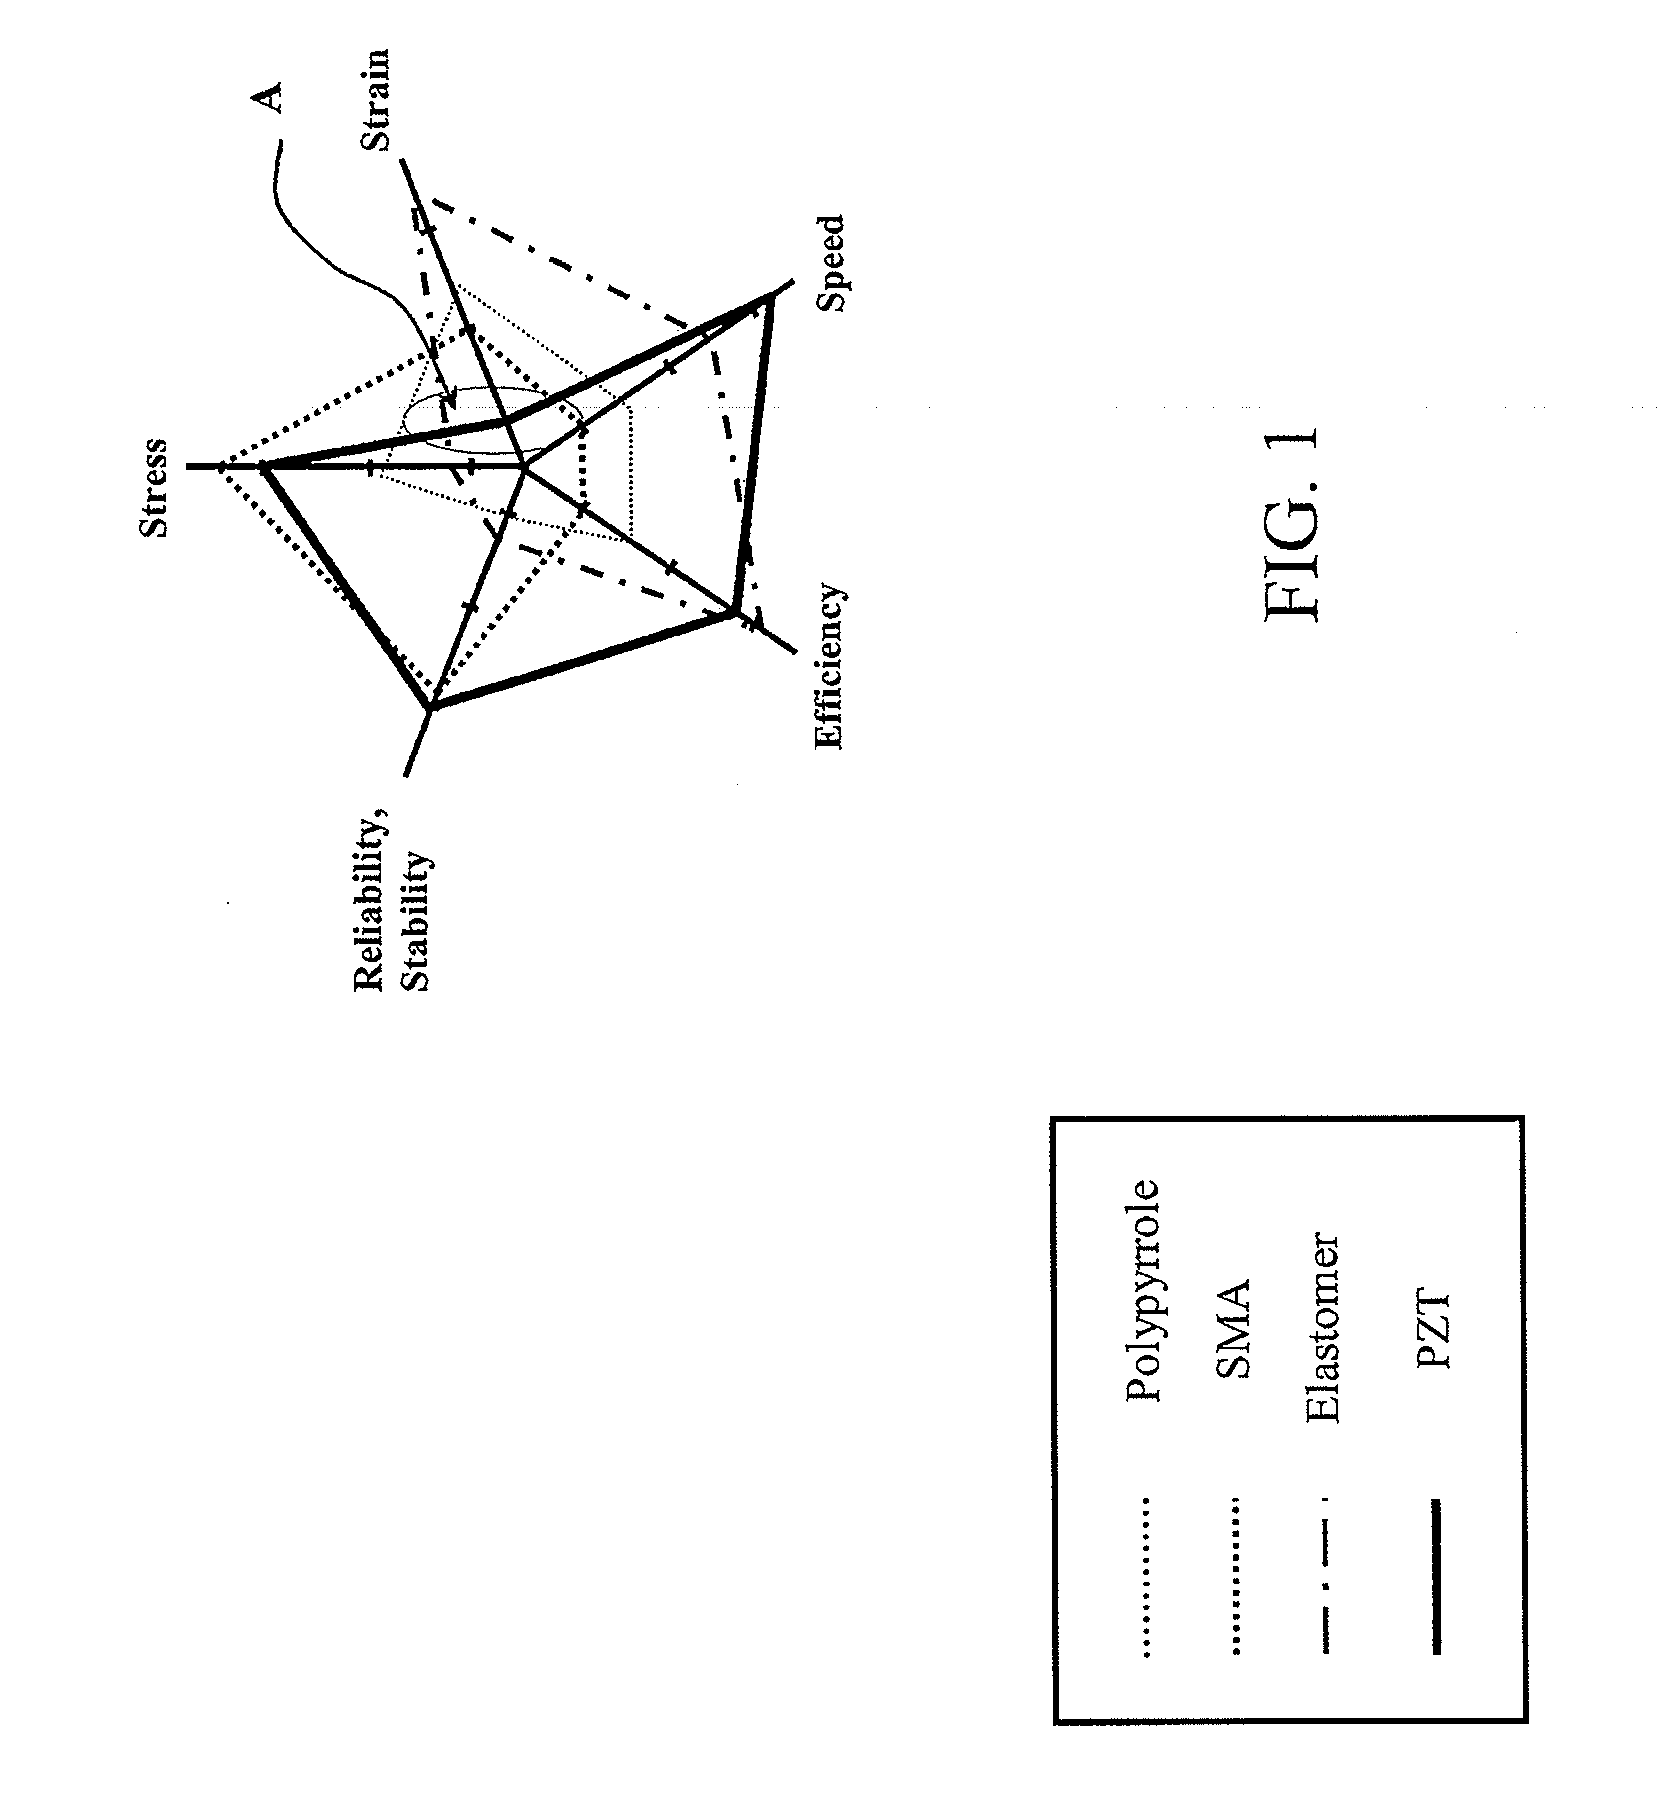 Strain amplification devices and methods